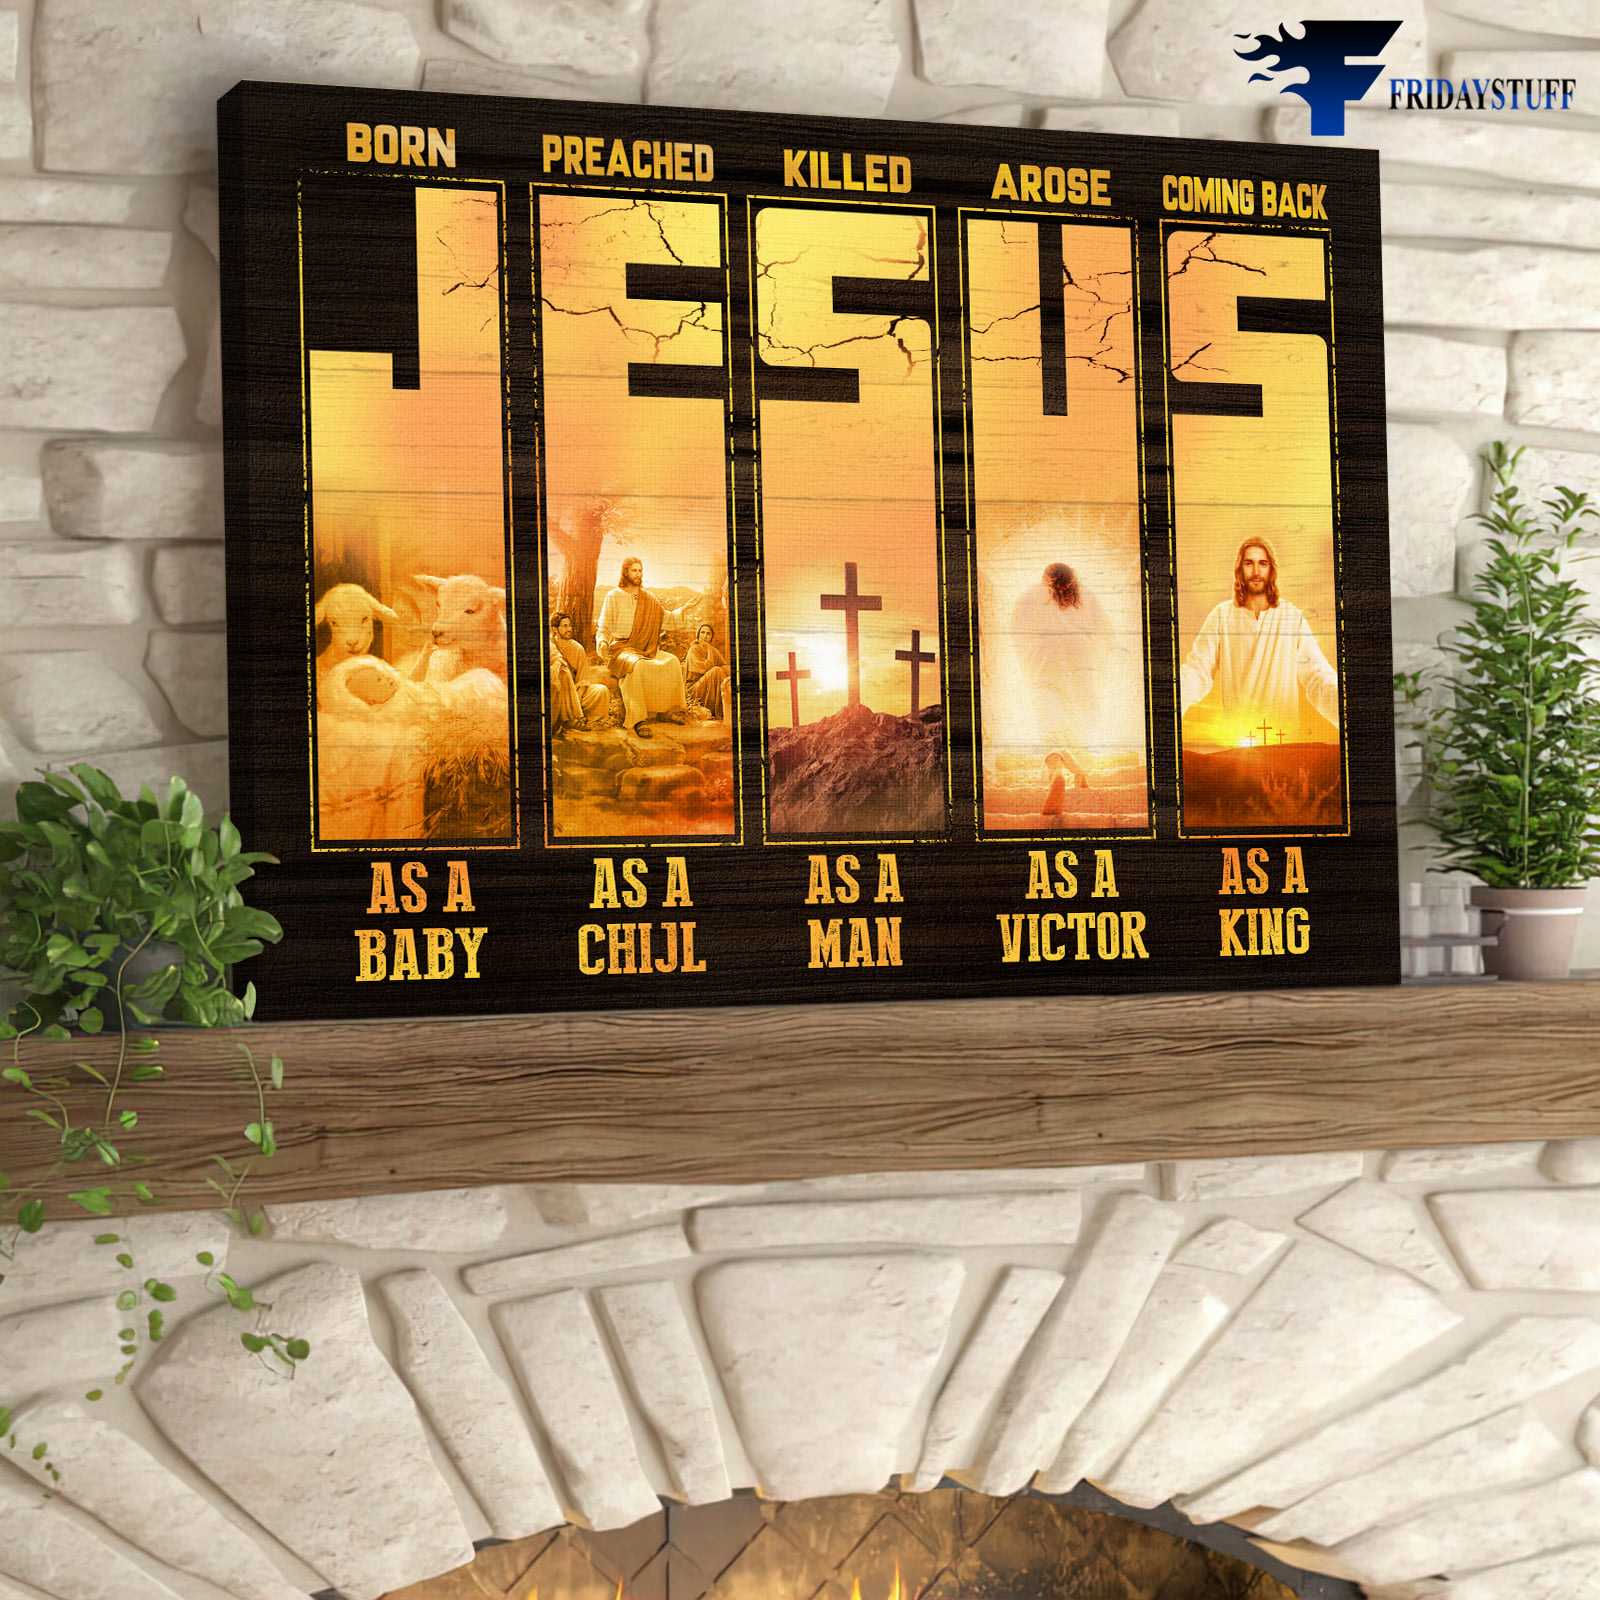 Jesus Poster, Jesus And Lamb, Born As Baby, Preached As A Child, Killed As A Man, Arose As A Victor, Coming Back As A King